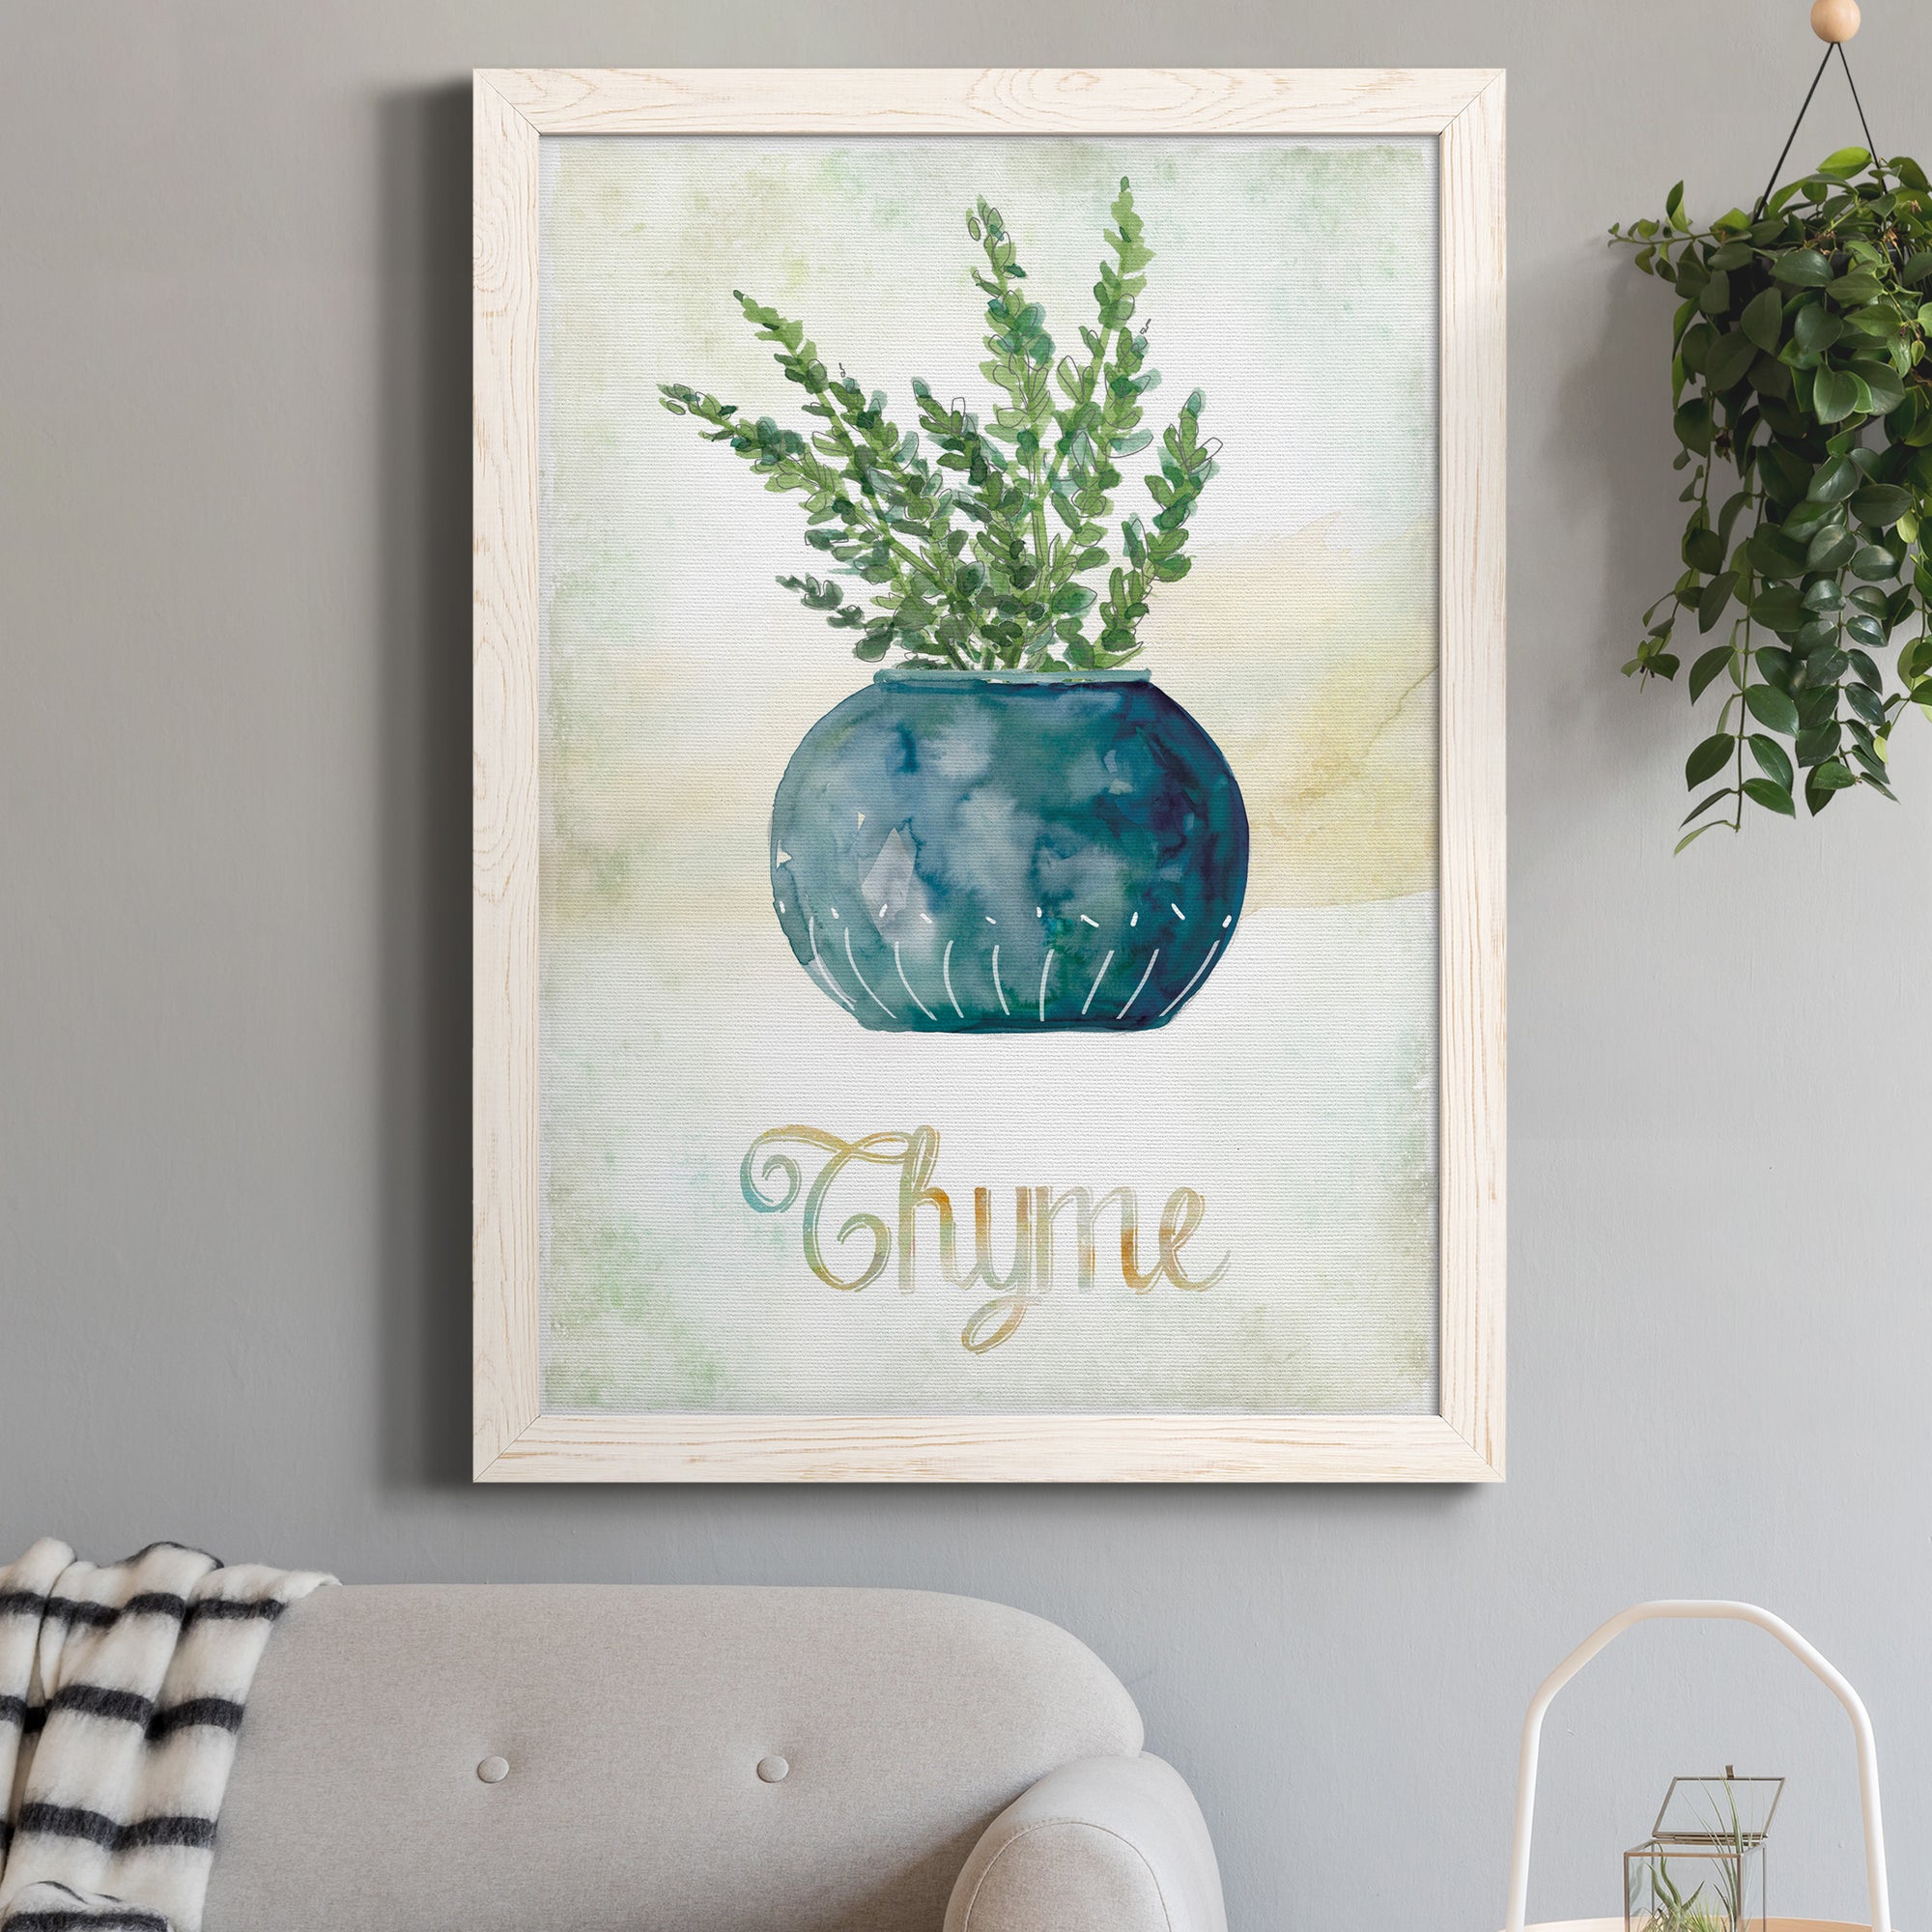 Potted Thyme - Premium Canvas Framed in Barnwood - Ready to Hang